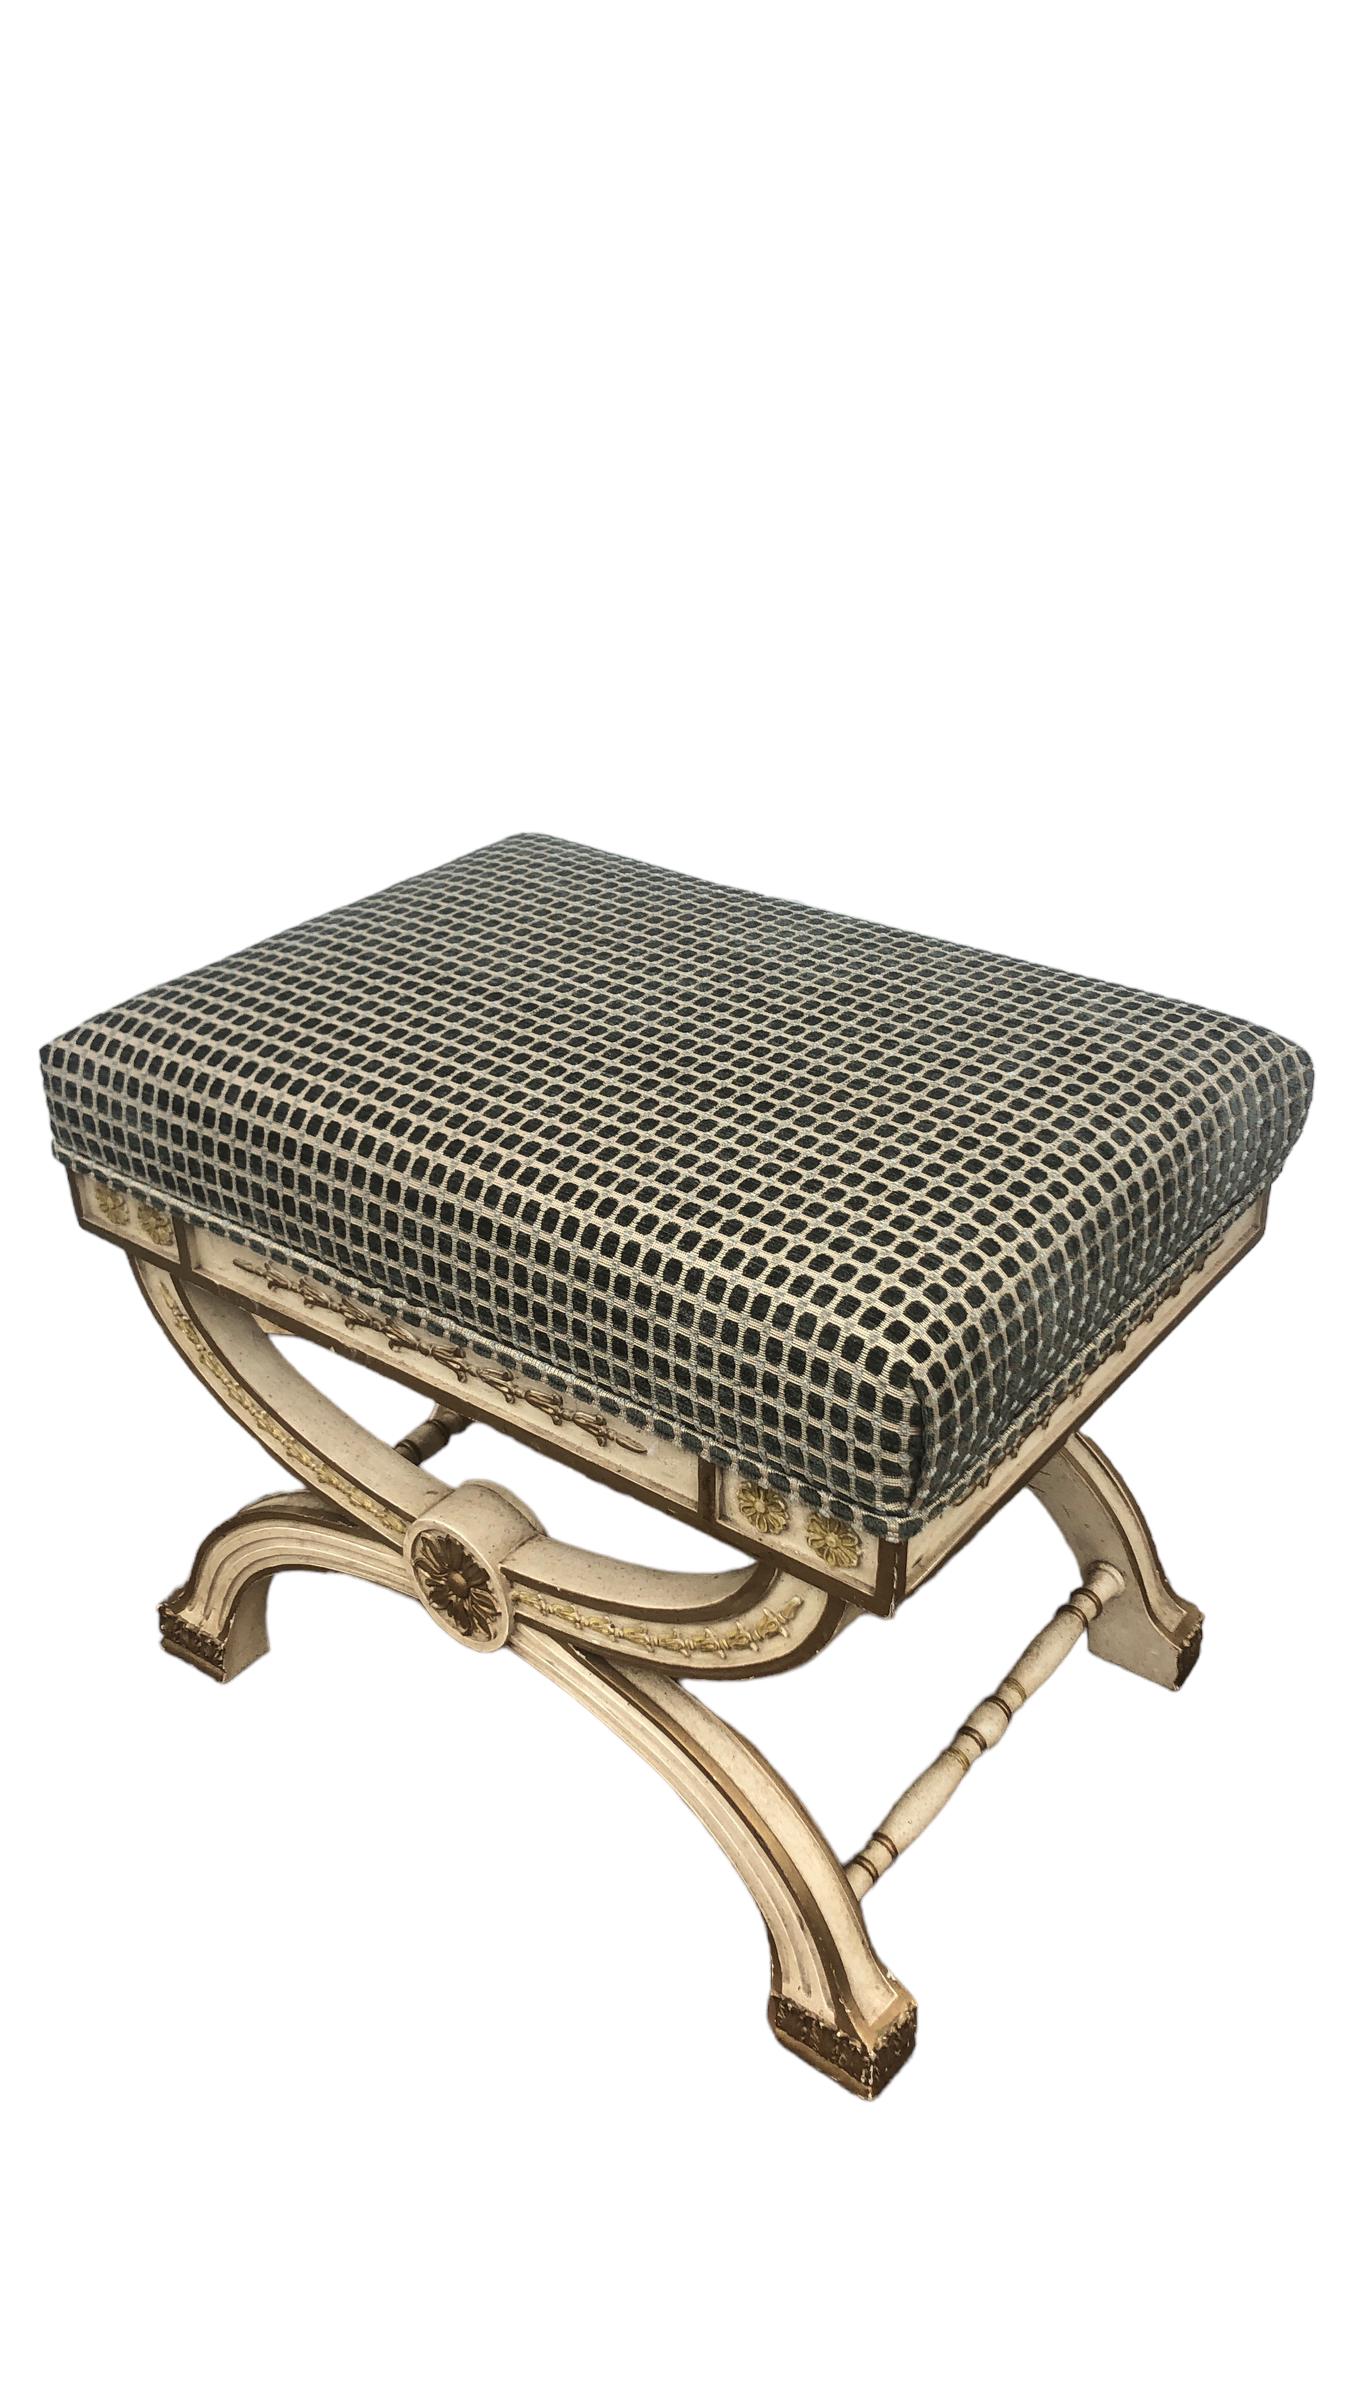 Vintage X Form Regency Style Upholstered Bench. Painted in a cream white finish with gold accents. Newly upholstered in a velvet checkered fabric. 